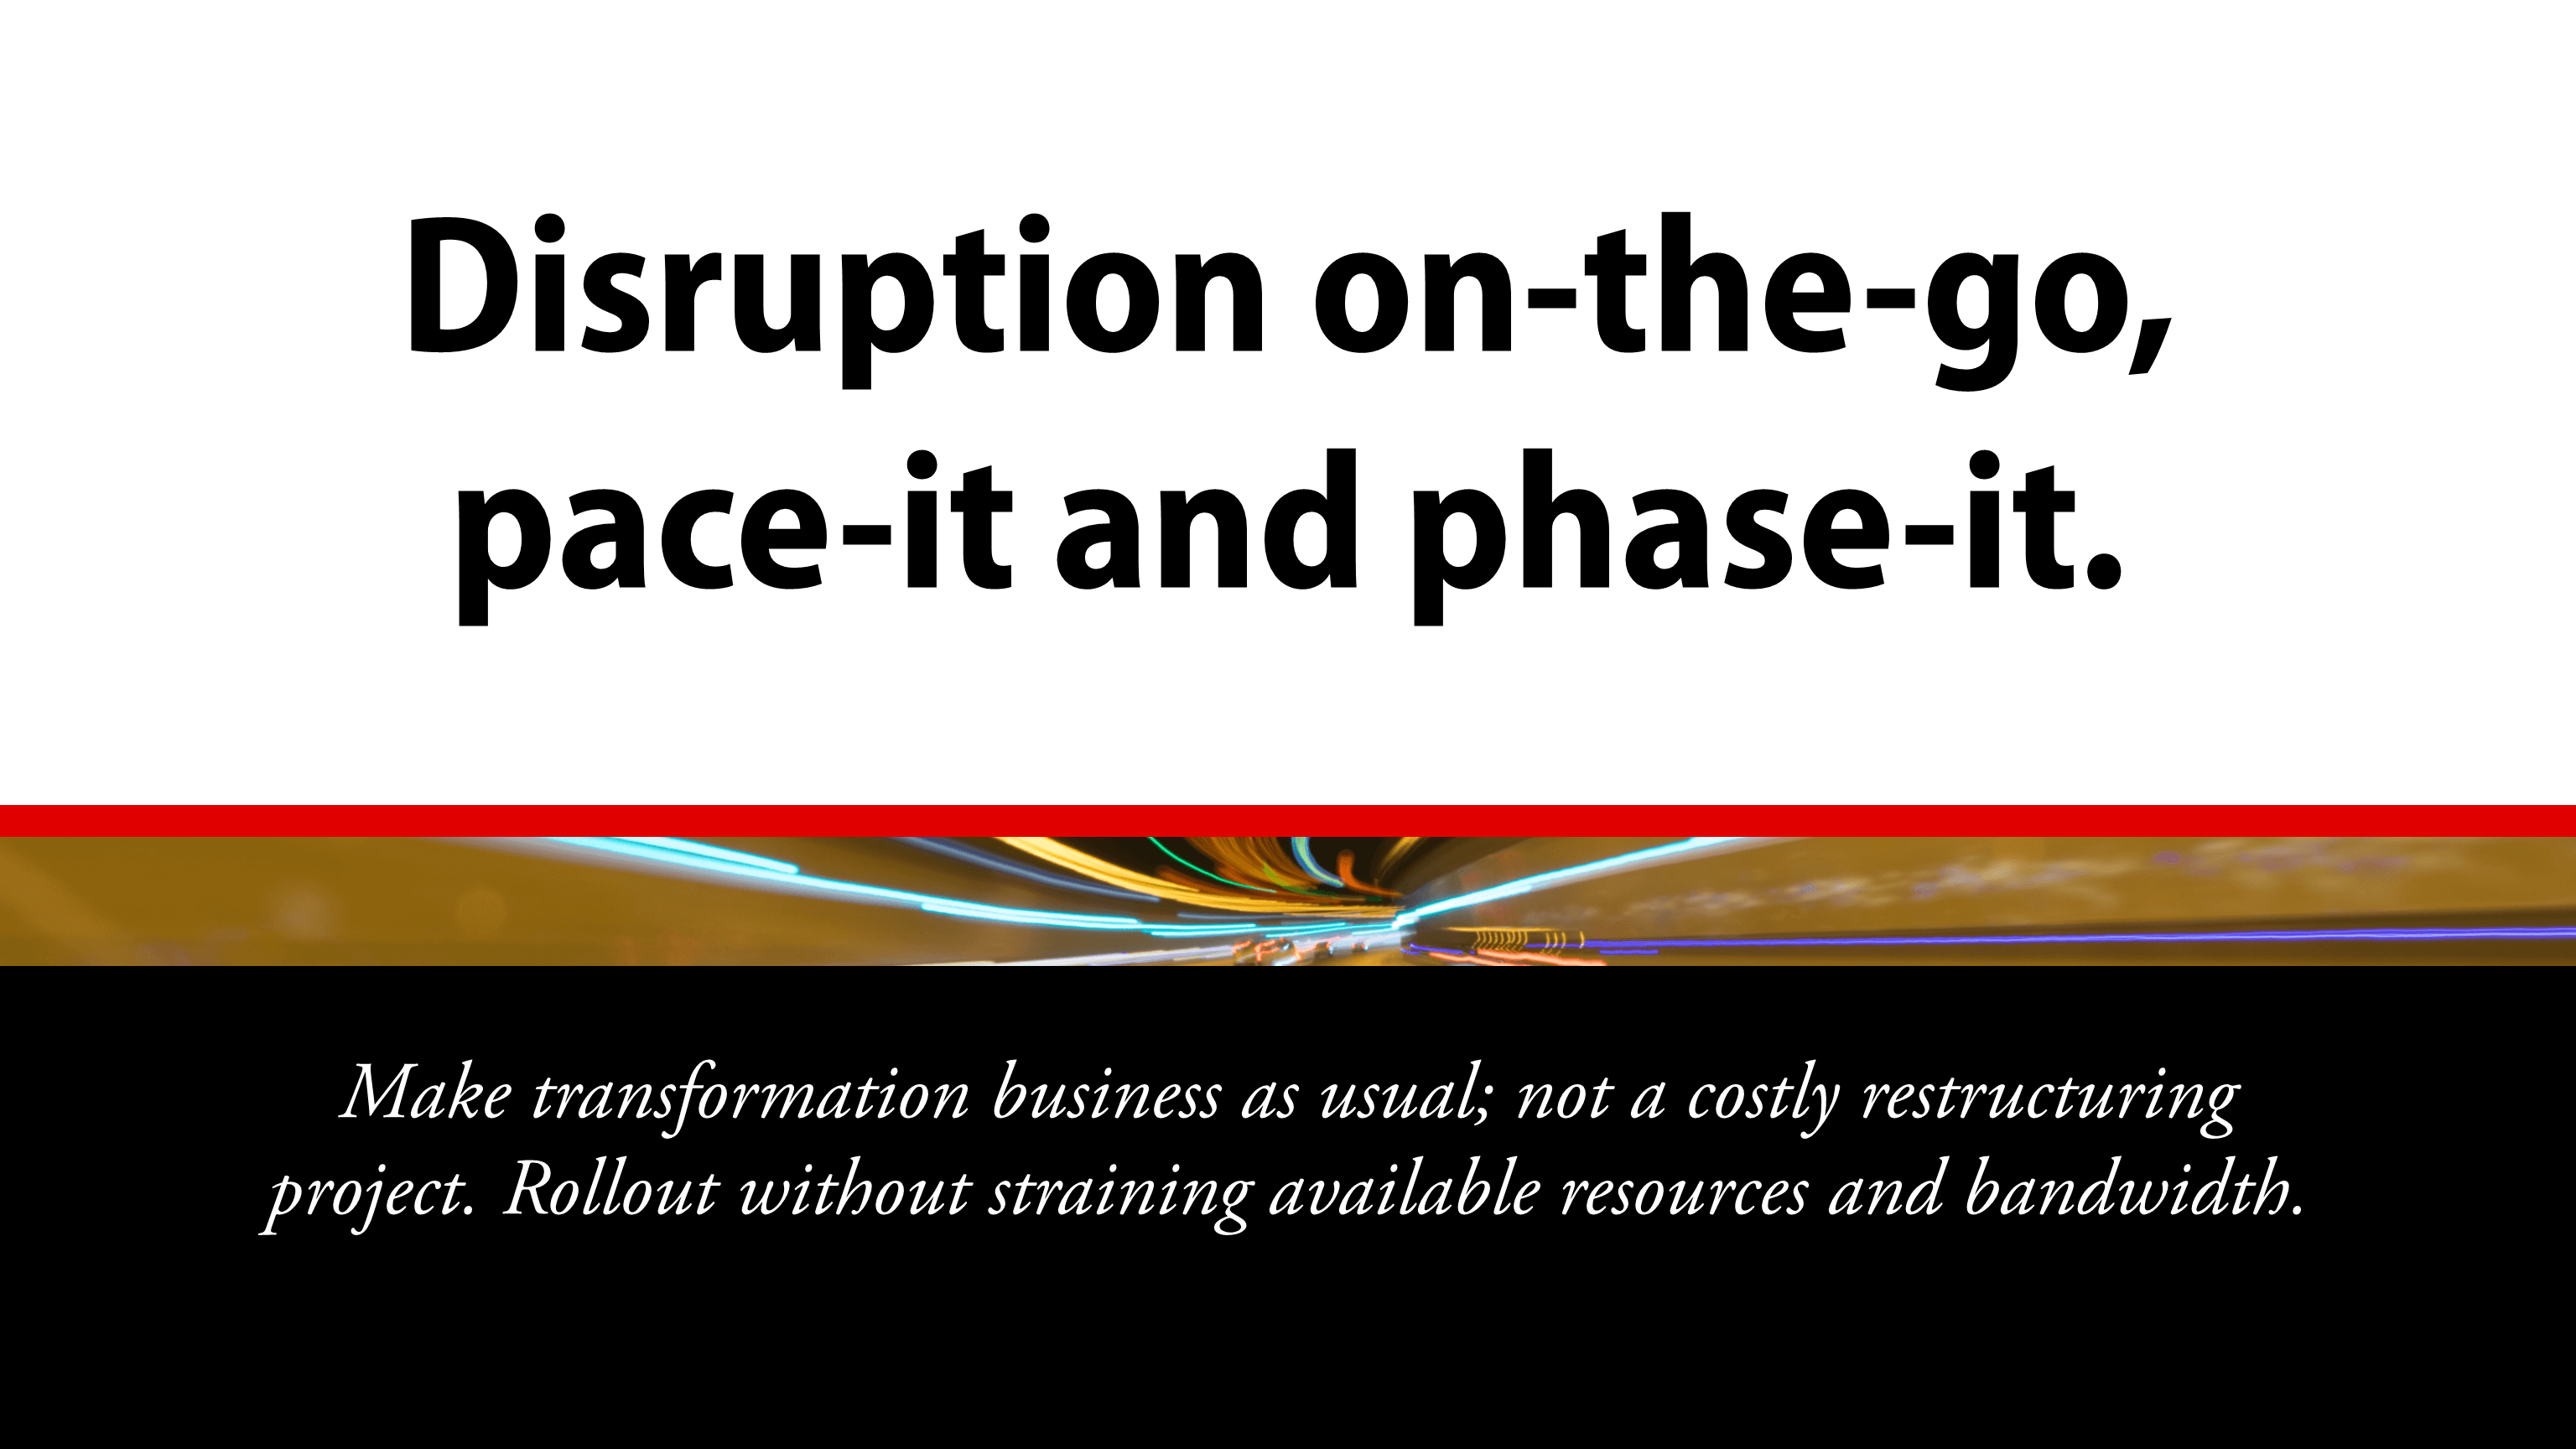 Disruption on-the-go